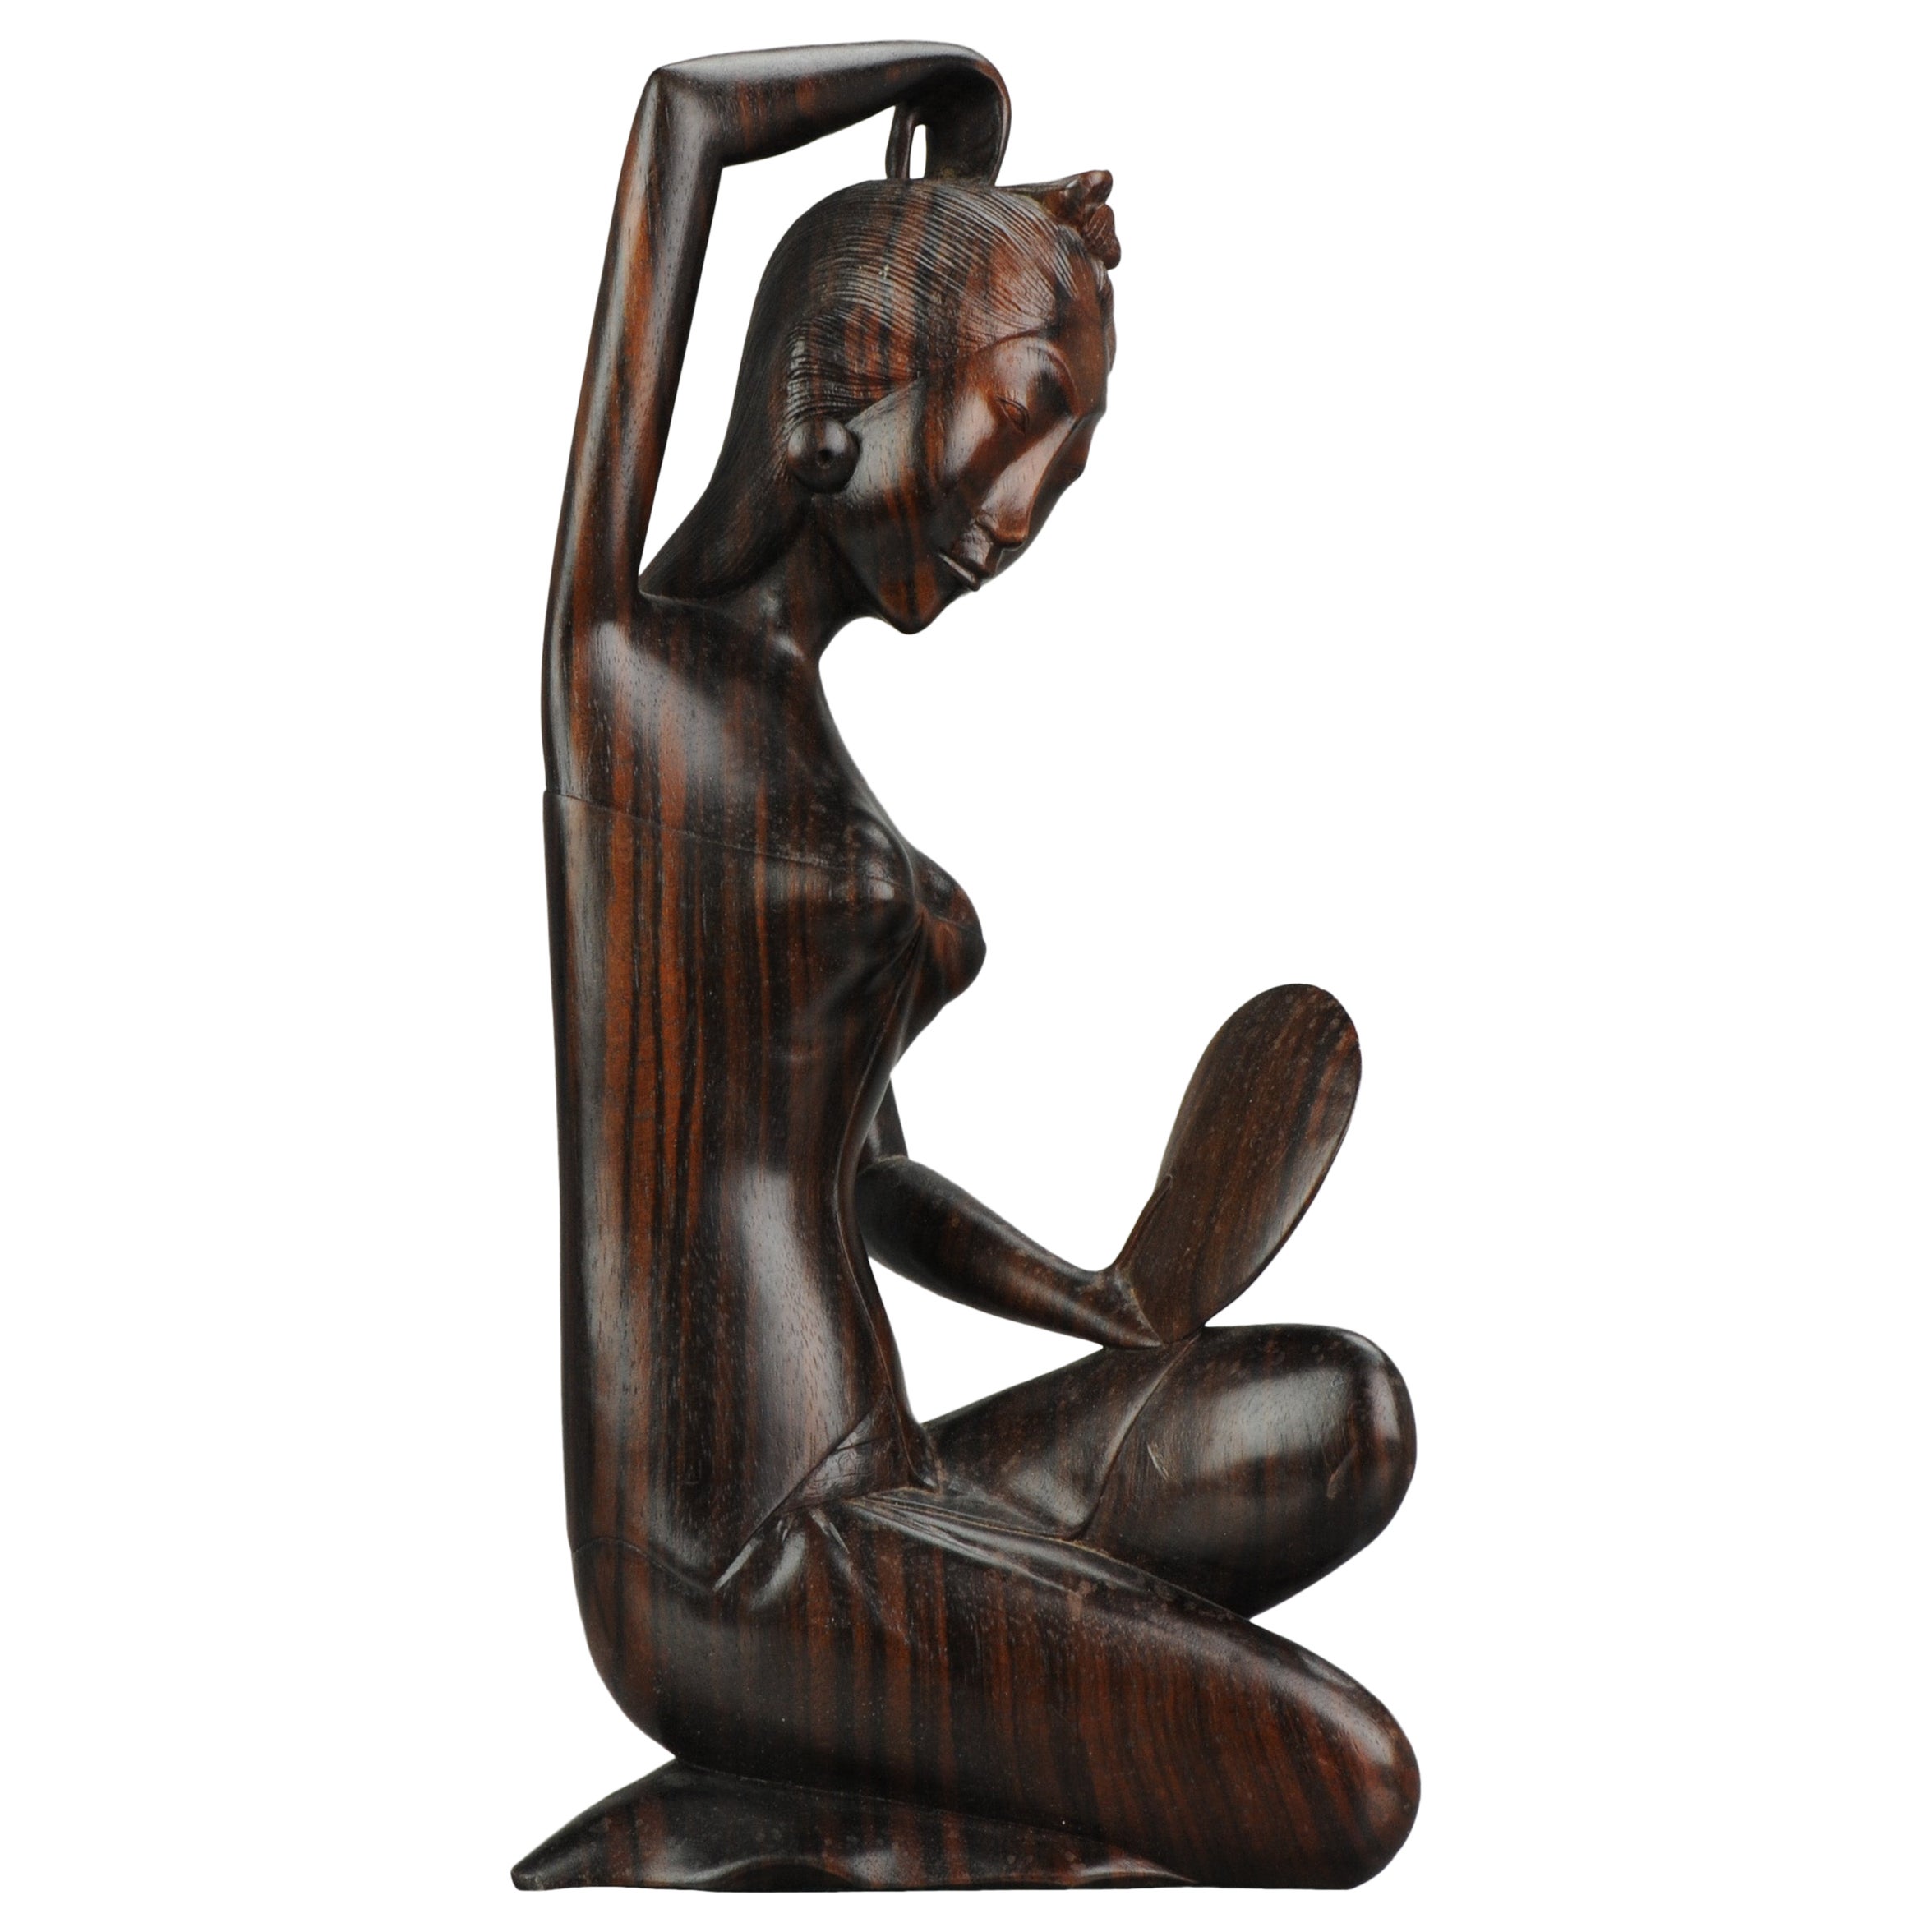 Balinese Carved Wood Statues of a Naked Lady Great Carving, 1950 20th Century For Sale